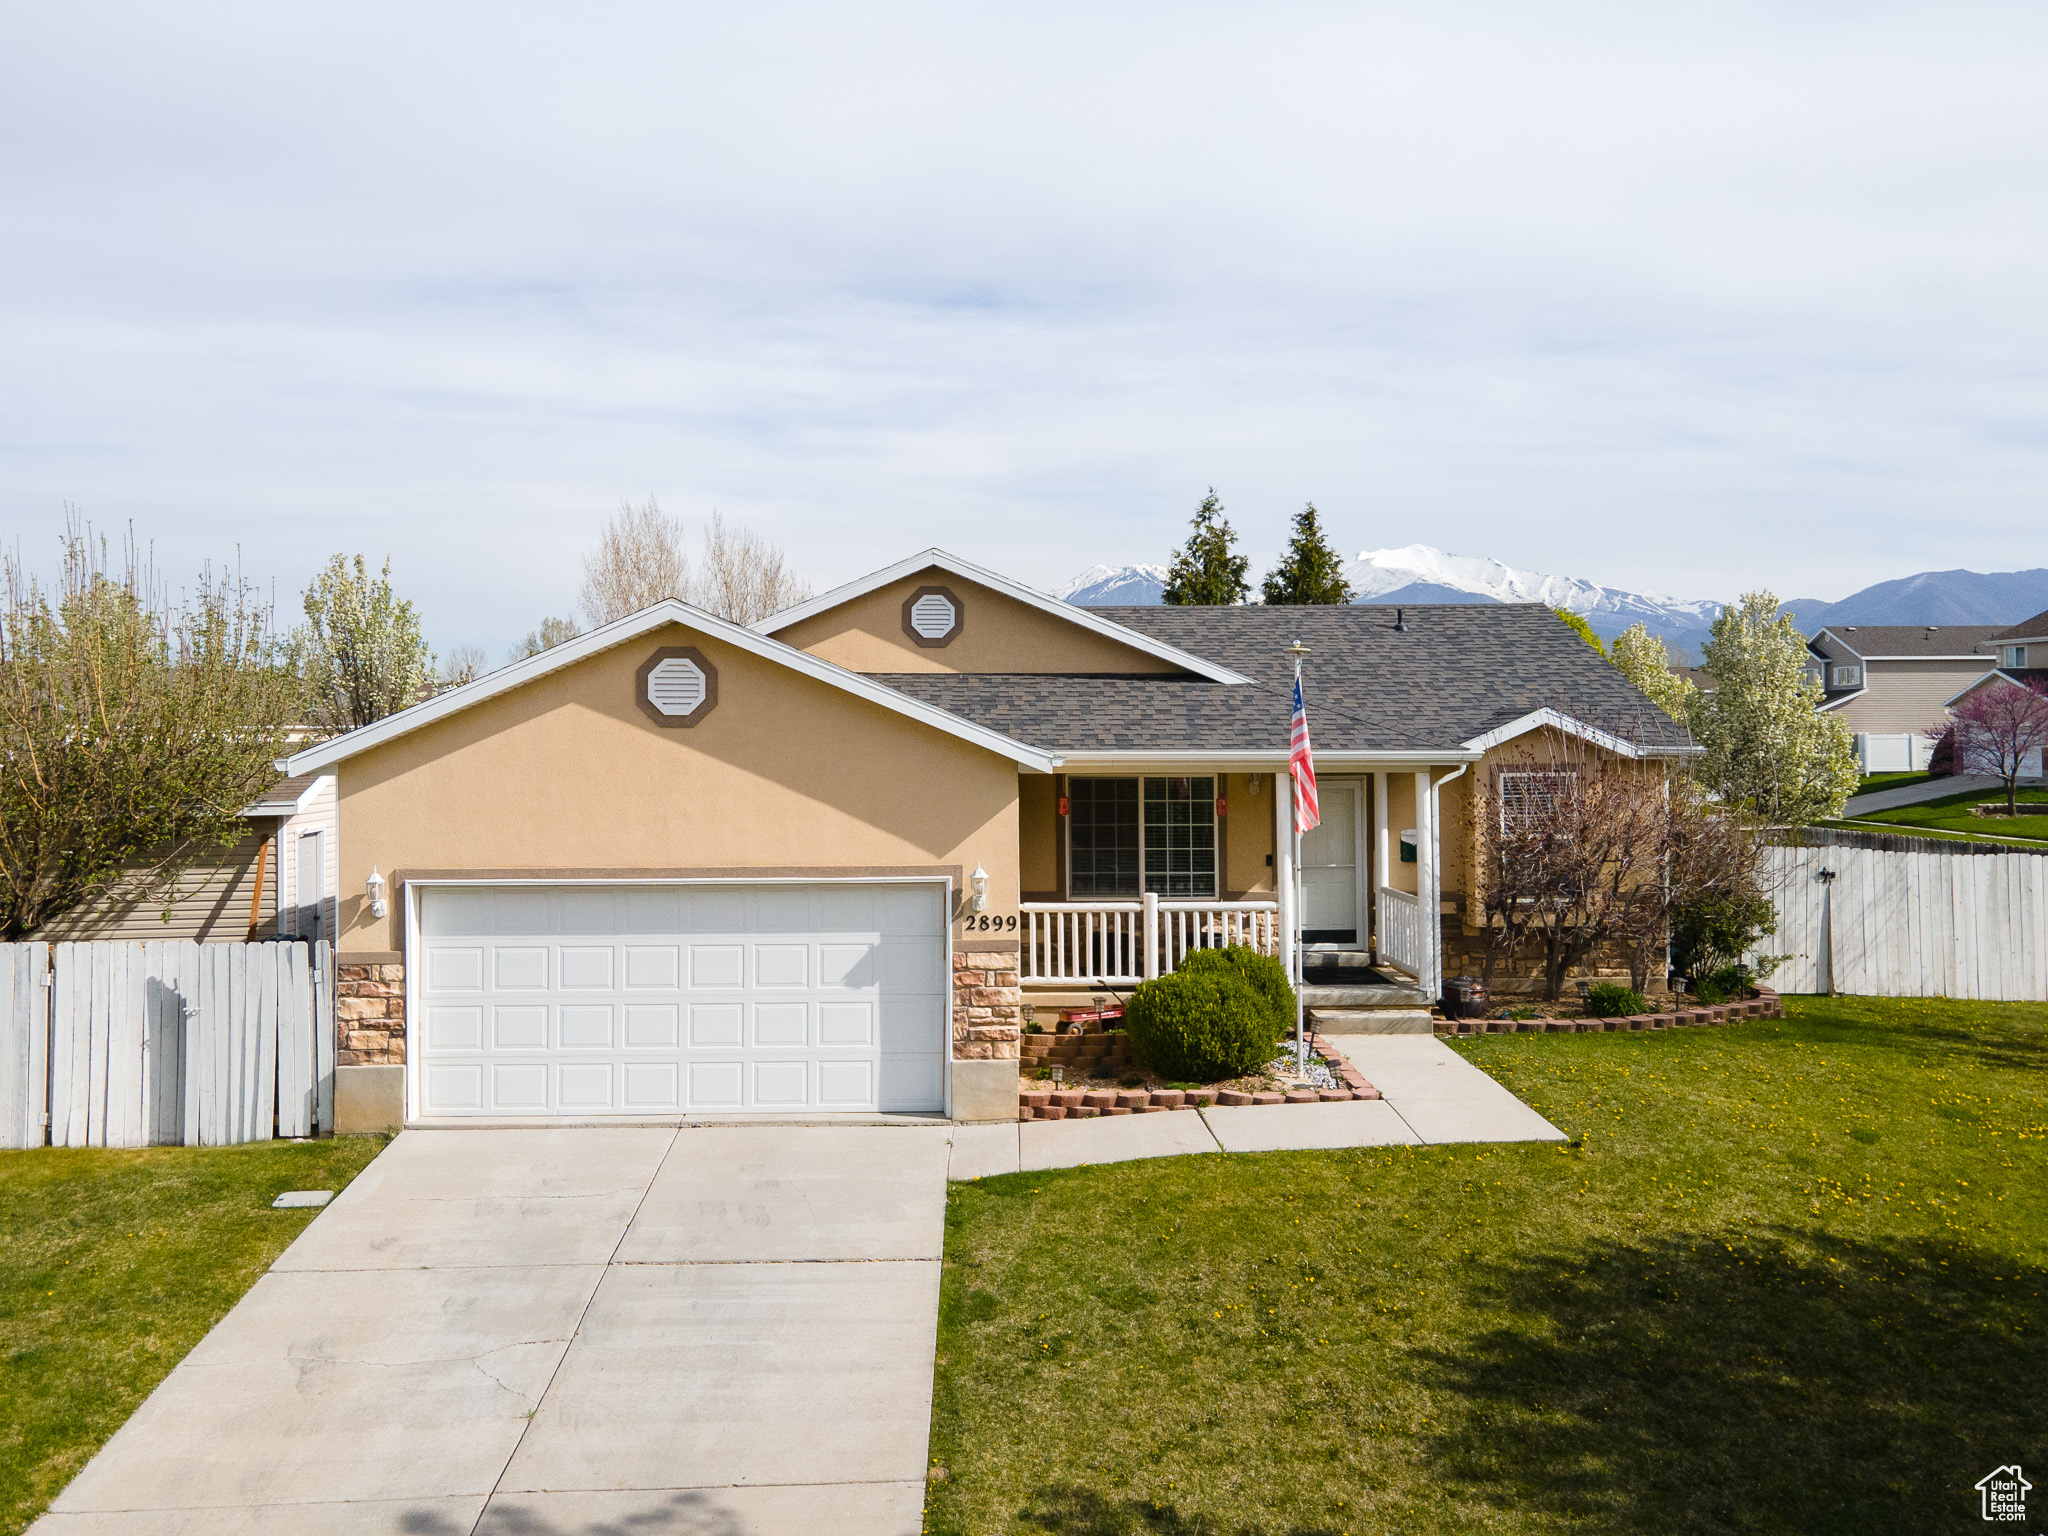 2899 E CANYON CREST, Spanish Fork, Utah 84660, 5 Bedrooms Bedrooms, 13 Rooms Rooms,3 BathroomsBathrooms,Residential,For sale,CANYON CREST,1993726